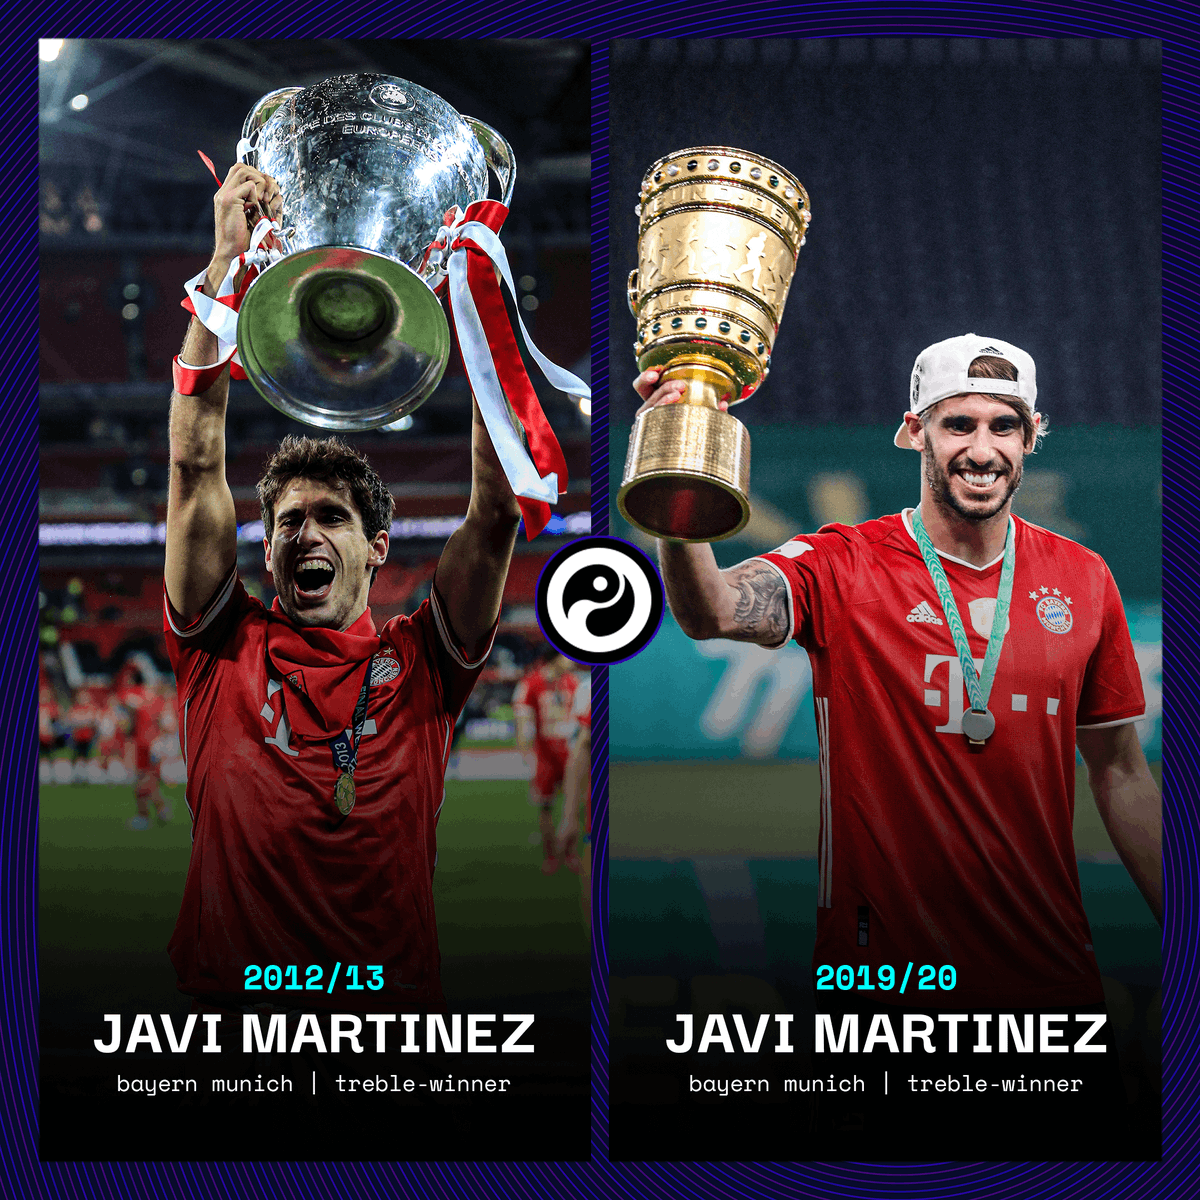 2012/13: Javi Martinez wins the treble with Bayern Munich2019/20: Javi Martinez wins the treble with Bayern MunichTwo-time treble-winner as well as World Cup and European Championship winner.